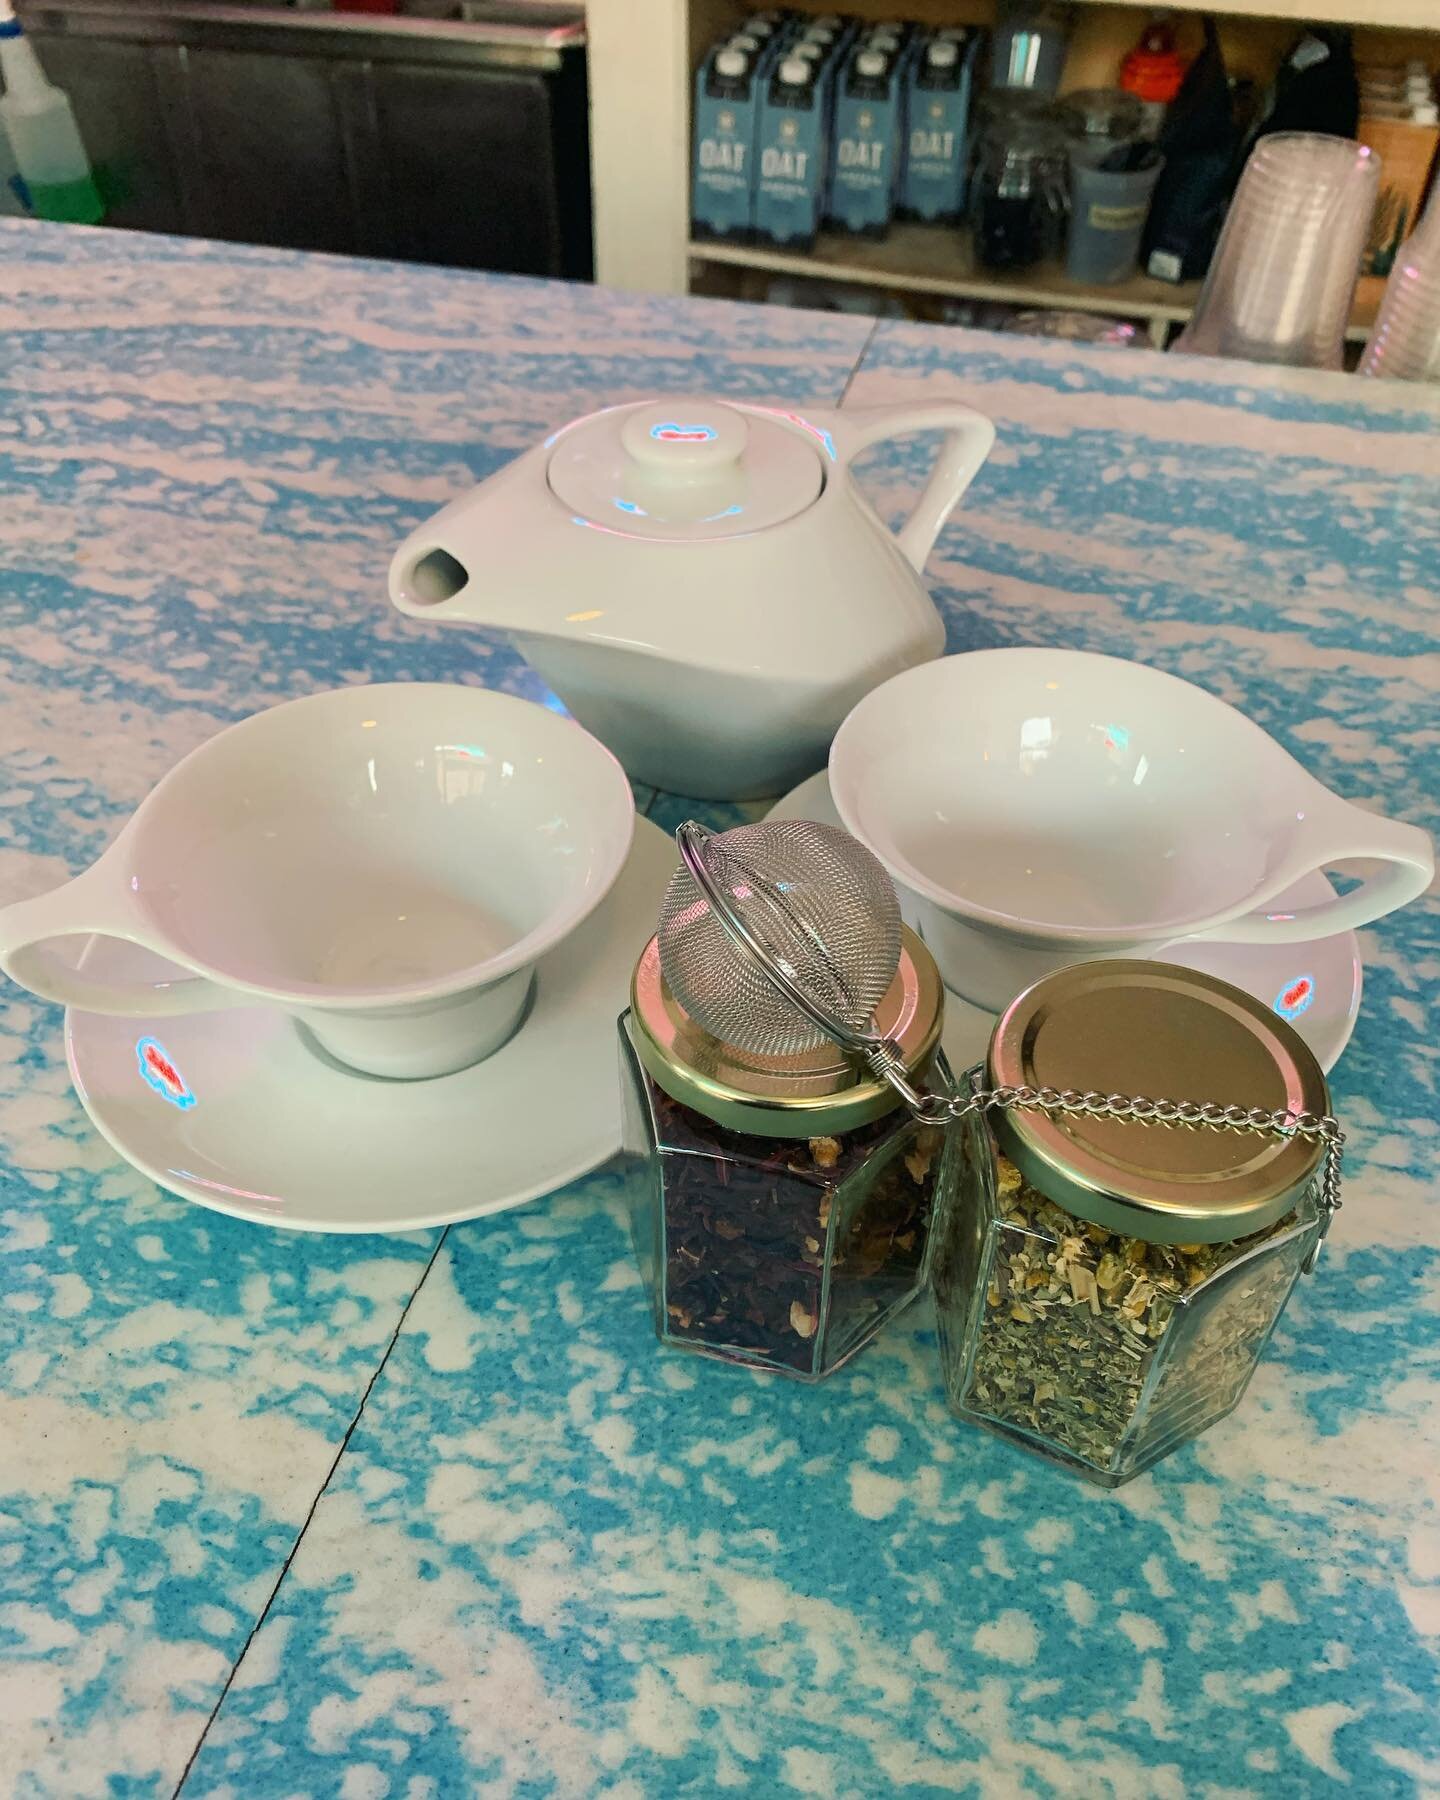 Do you have a tea lover in your life? We have the perfect holiday gift for them! This gorgeous tea set comes with a two cups and saucers, a pot, a tea ball for easy brewing, and TWO delicious herbal teas from @rishitea. 
Chamomile medley with lemongr